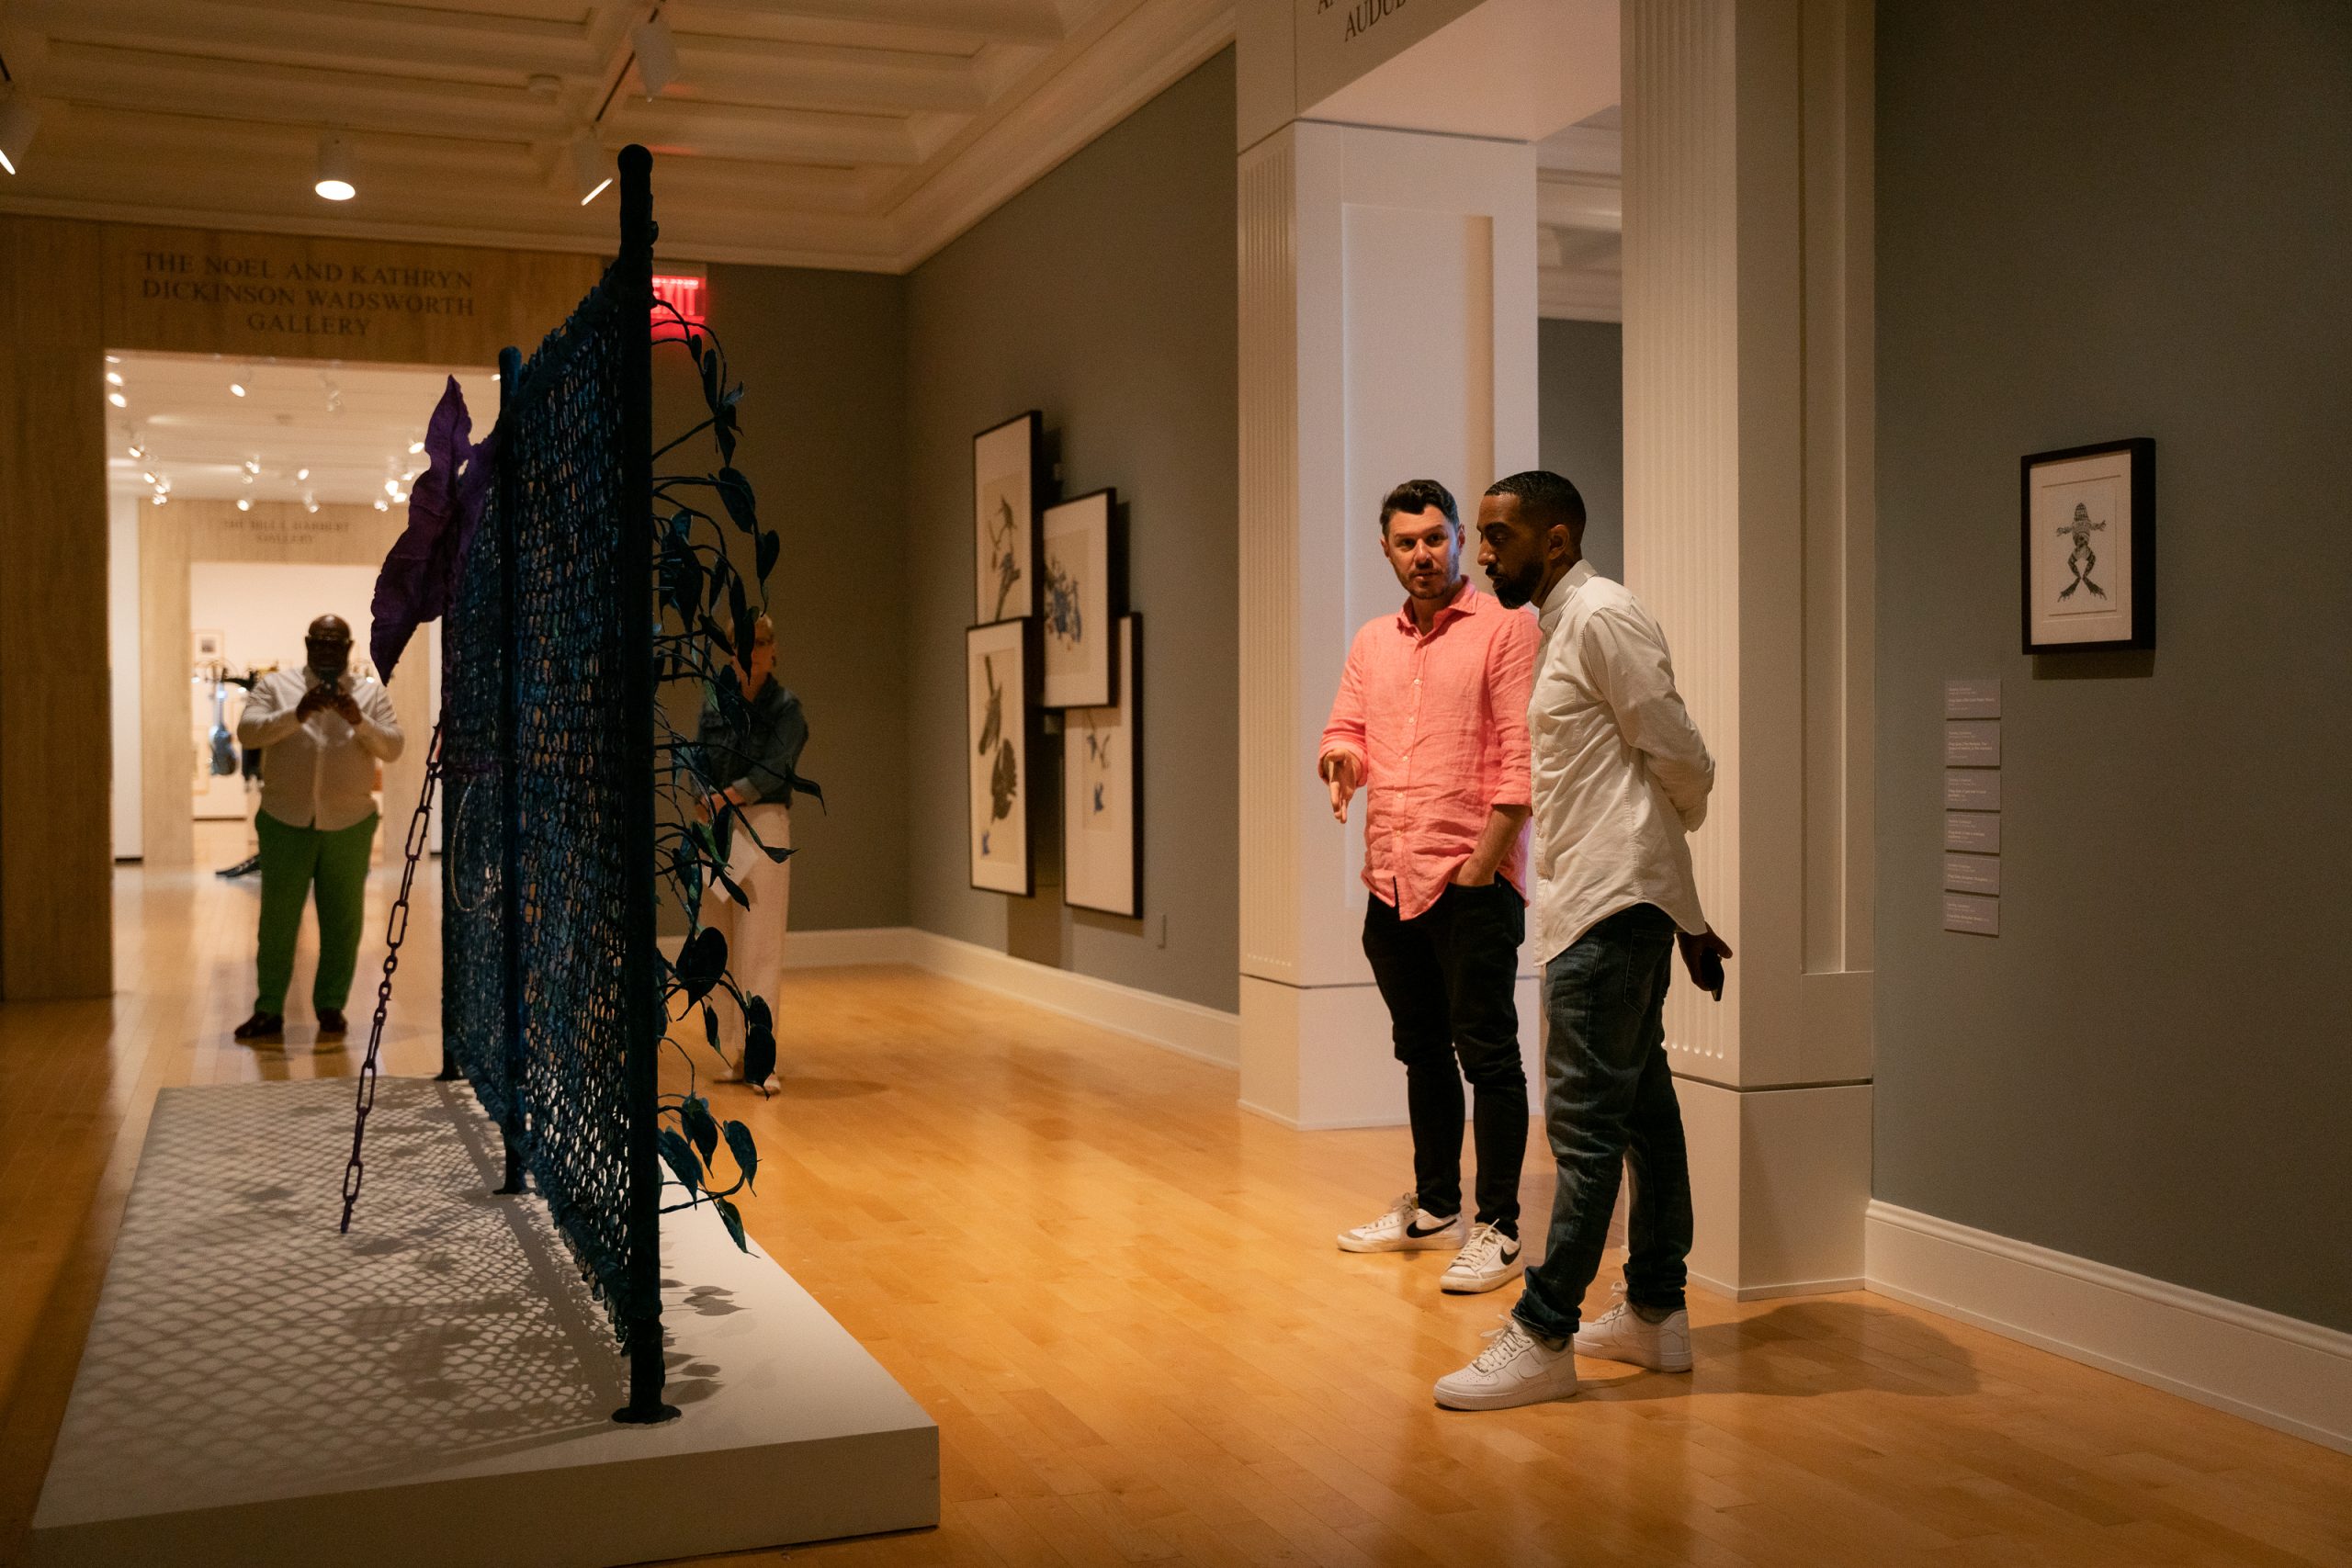 Two men discuss a sculpture in the middle of a gallery.